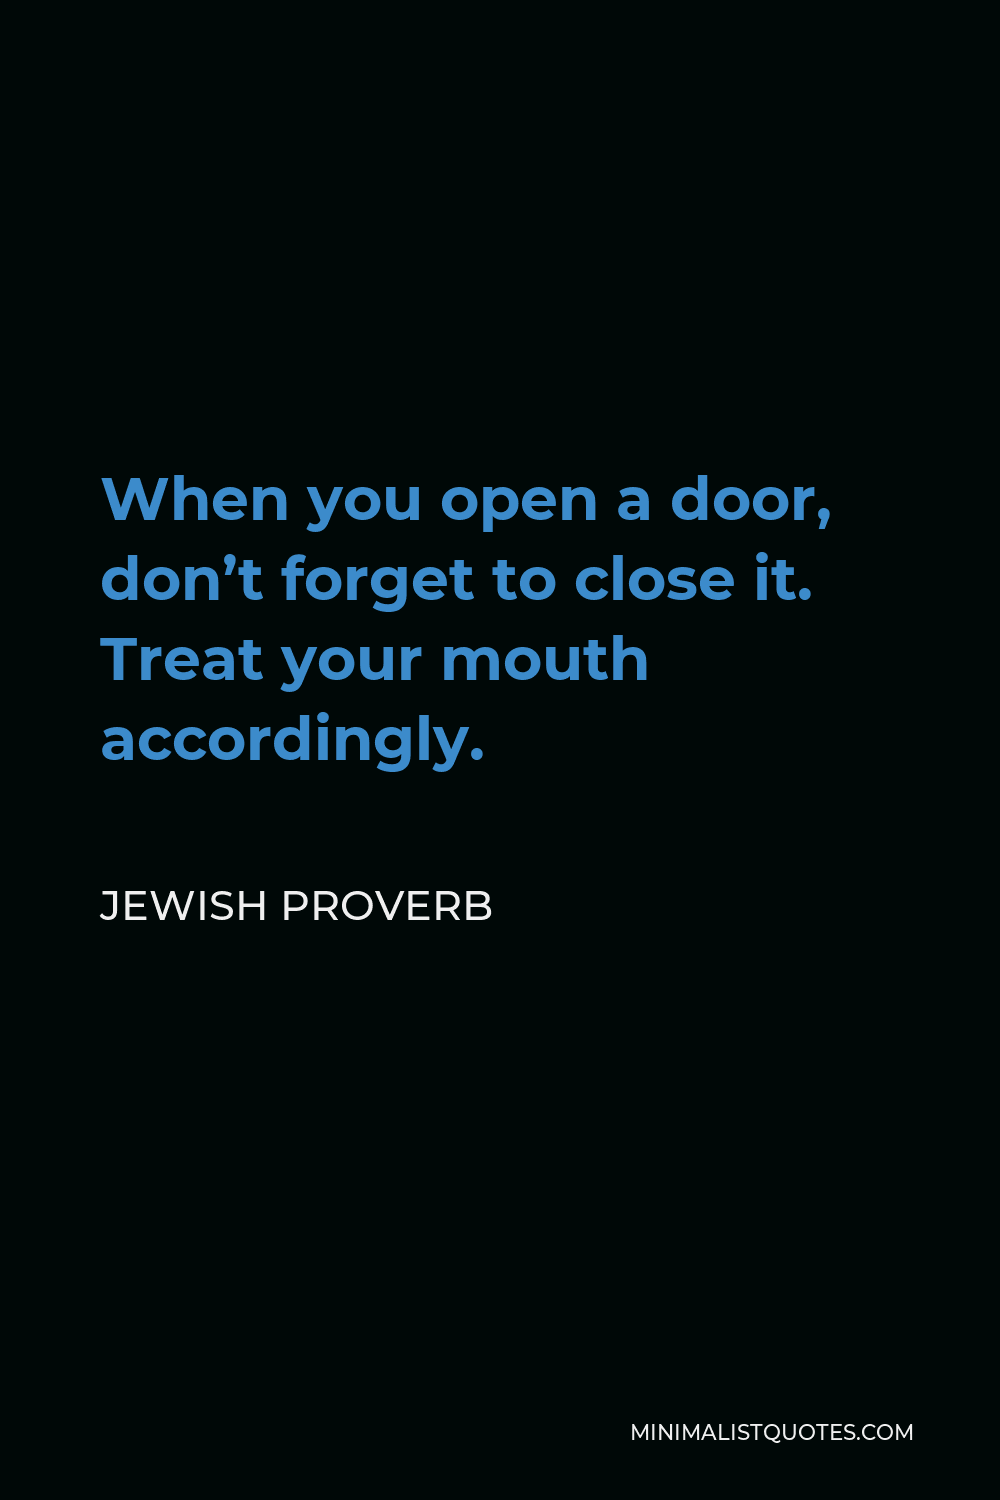 Jewish Proverb Quote - When you open a door, don’t forget to close it. Treat your mouth accordingly.